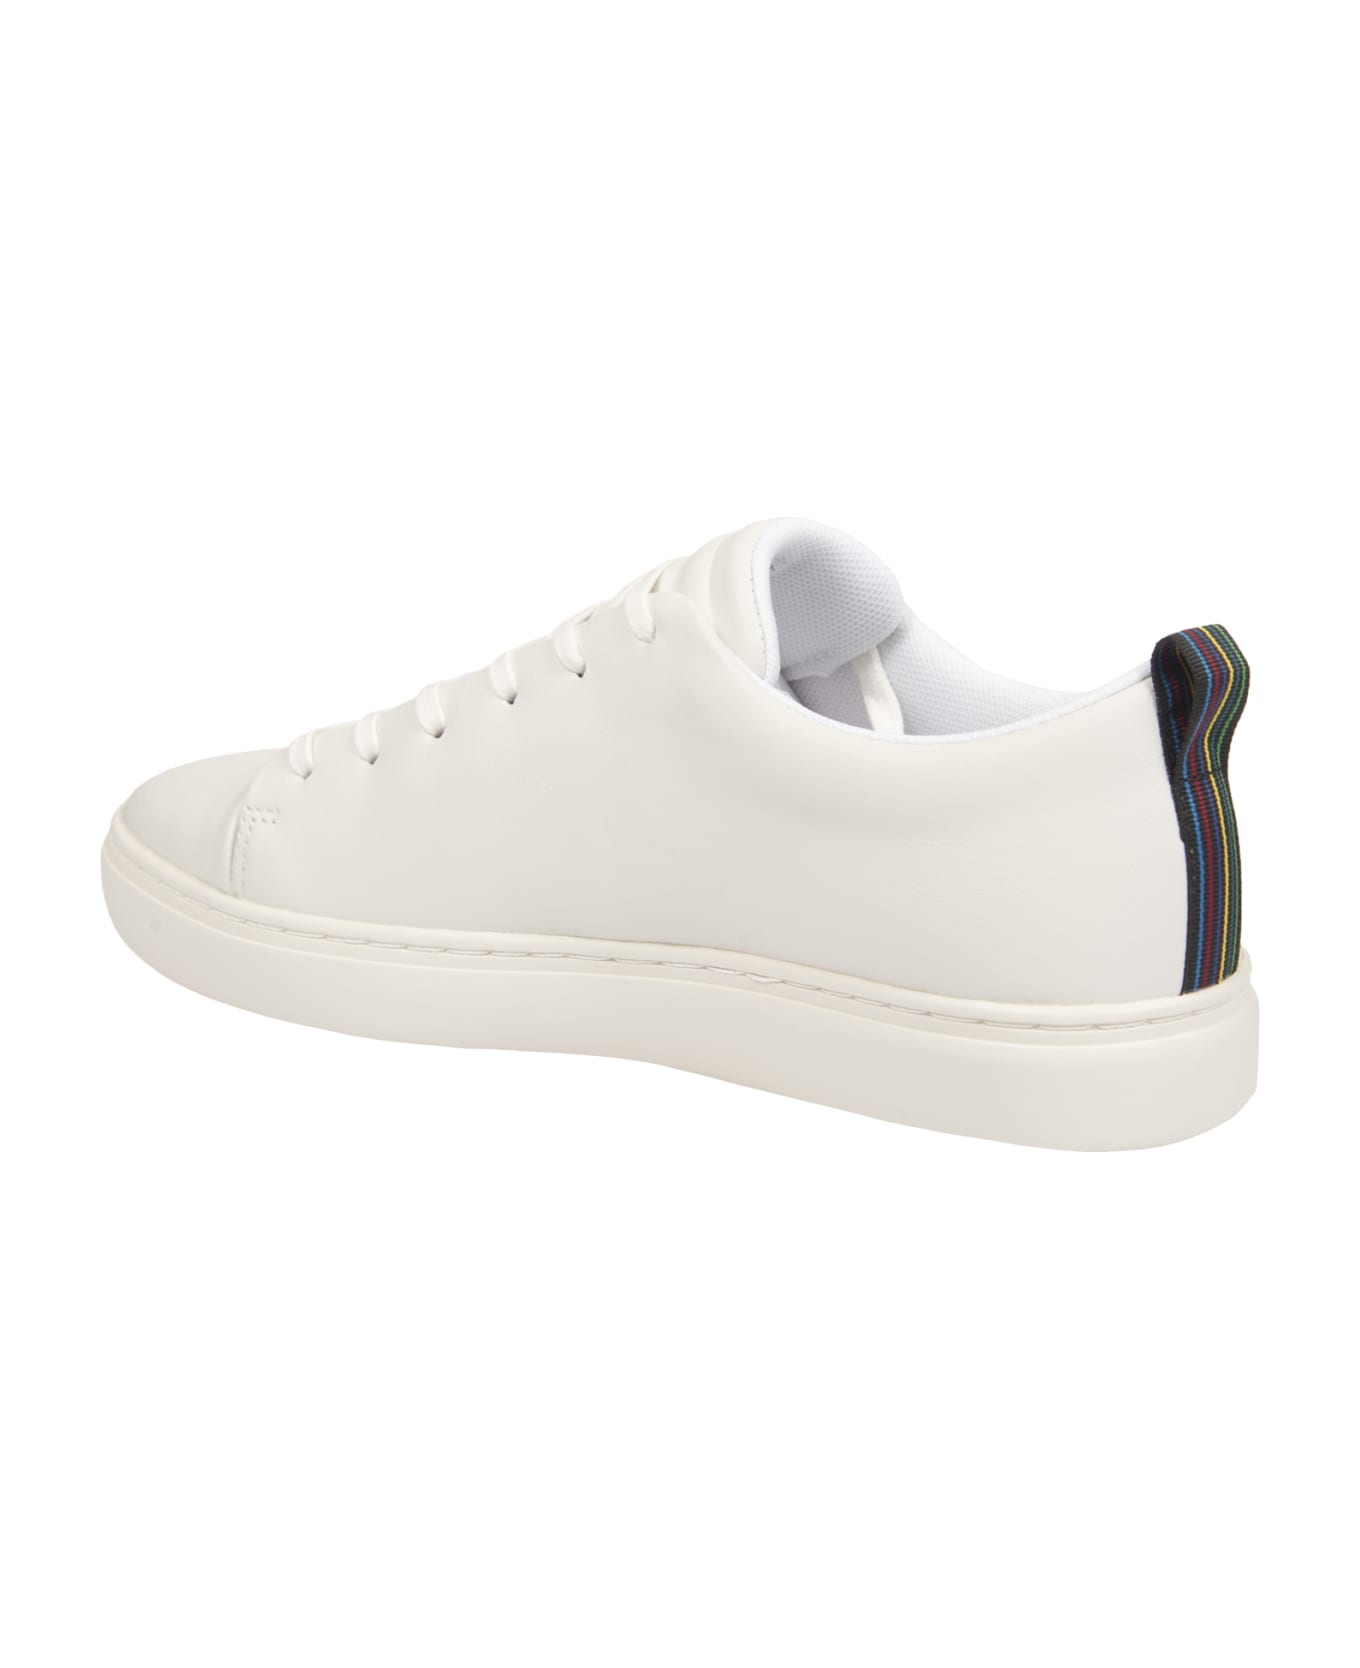 Paul Smith Lee Sneakers - White